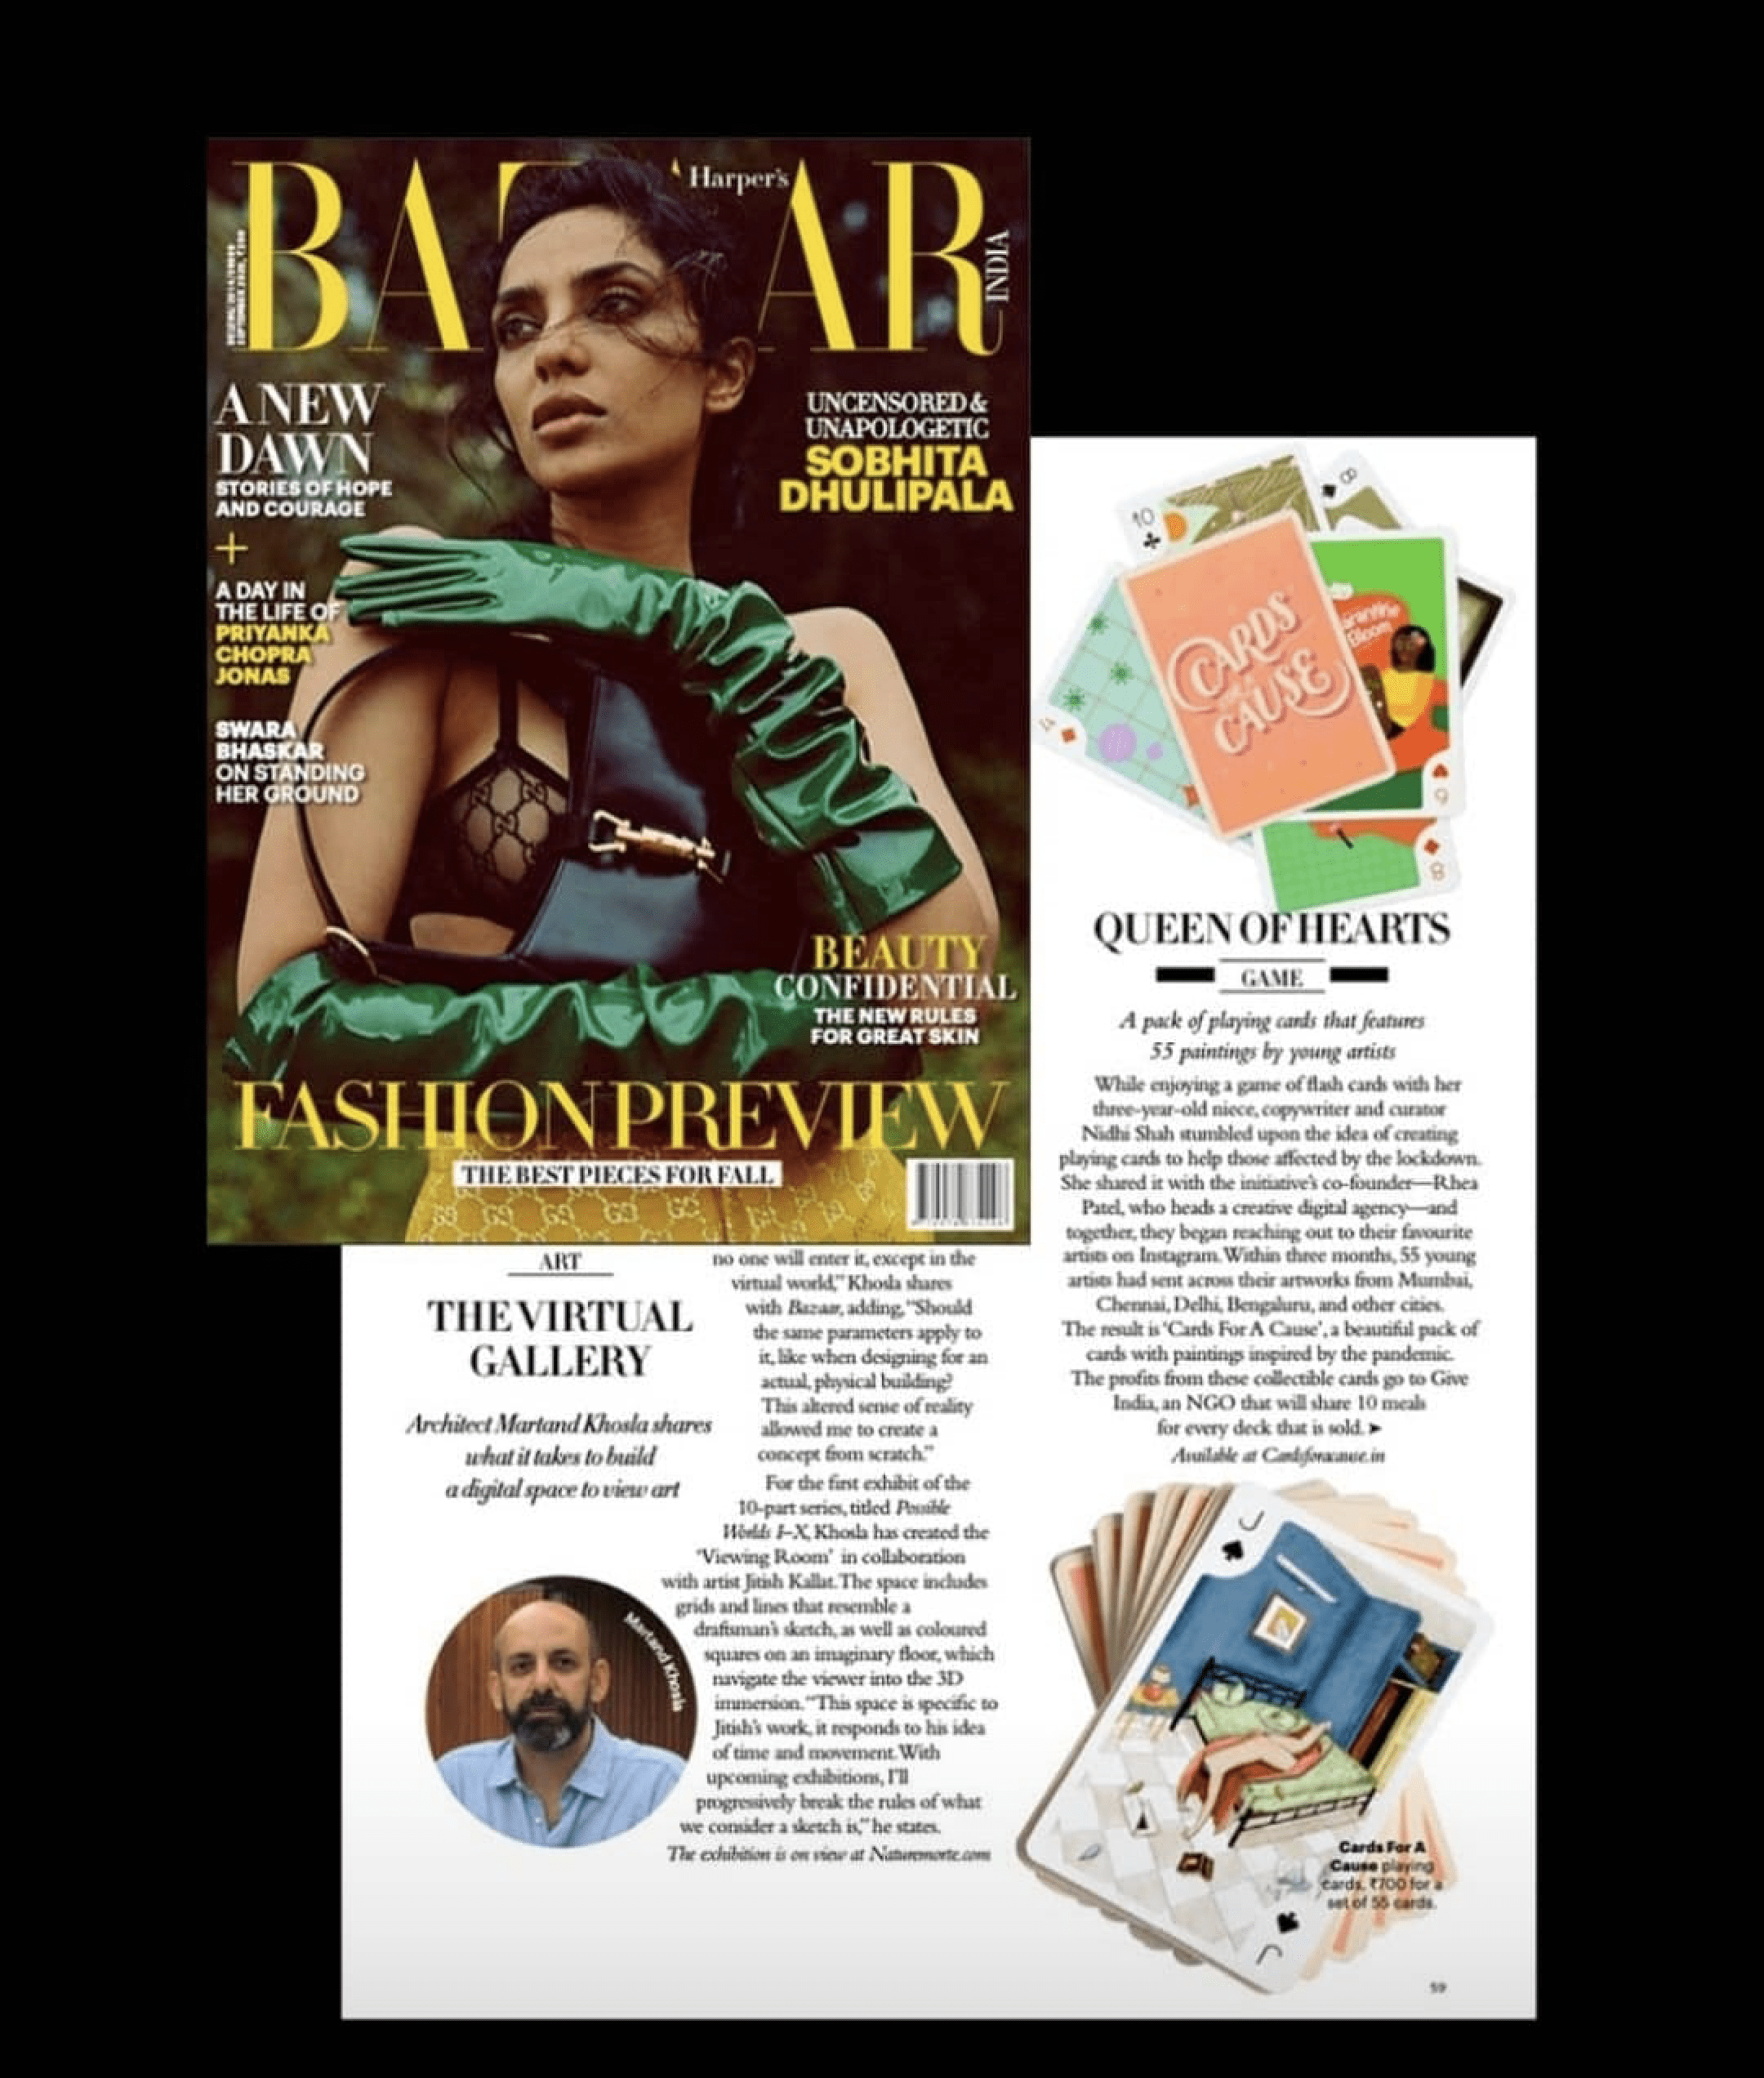 Cards for a Cause featured in Harper's Bazaar